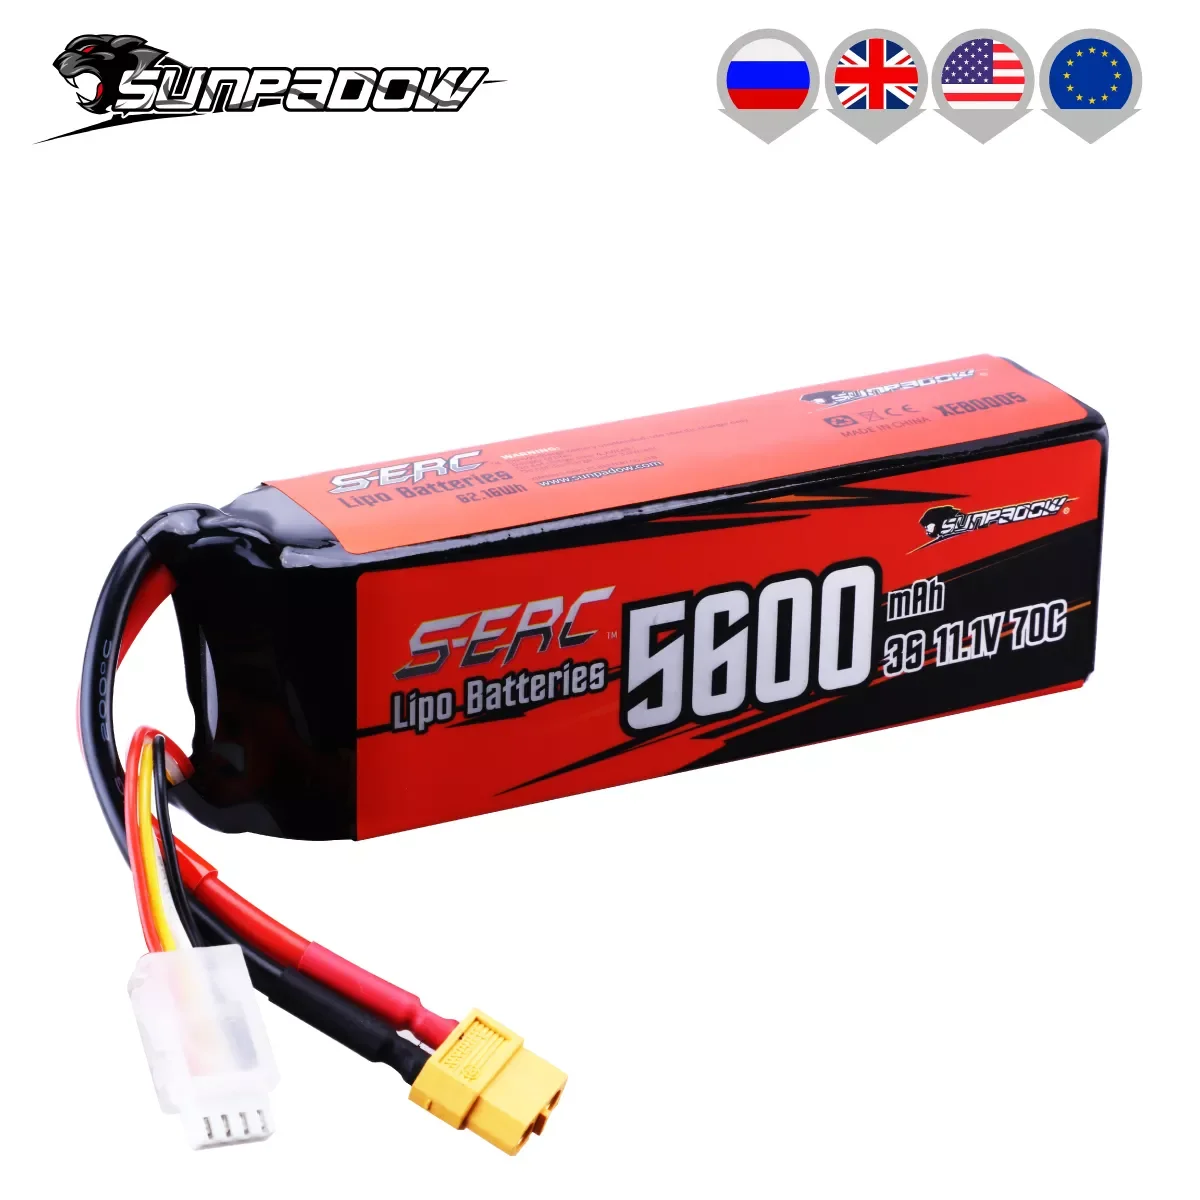 NEW 3S Lipo Battery 11.1V 5600mAh 70C Soft Pack with XT60 Plug for RC Vehicles Buggy Truggy Crawler Monster Truck Car Hobby